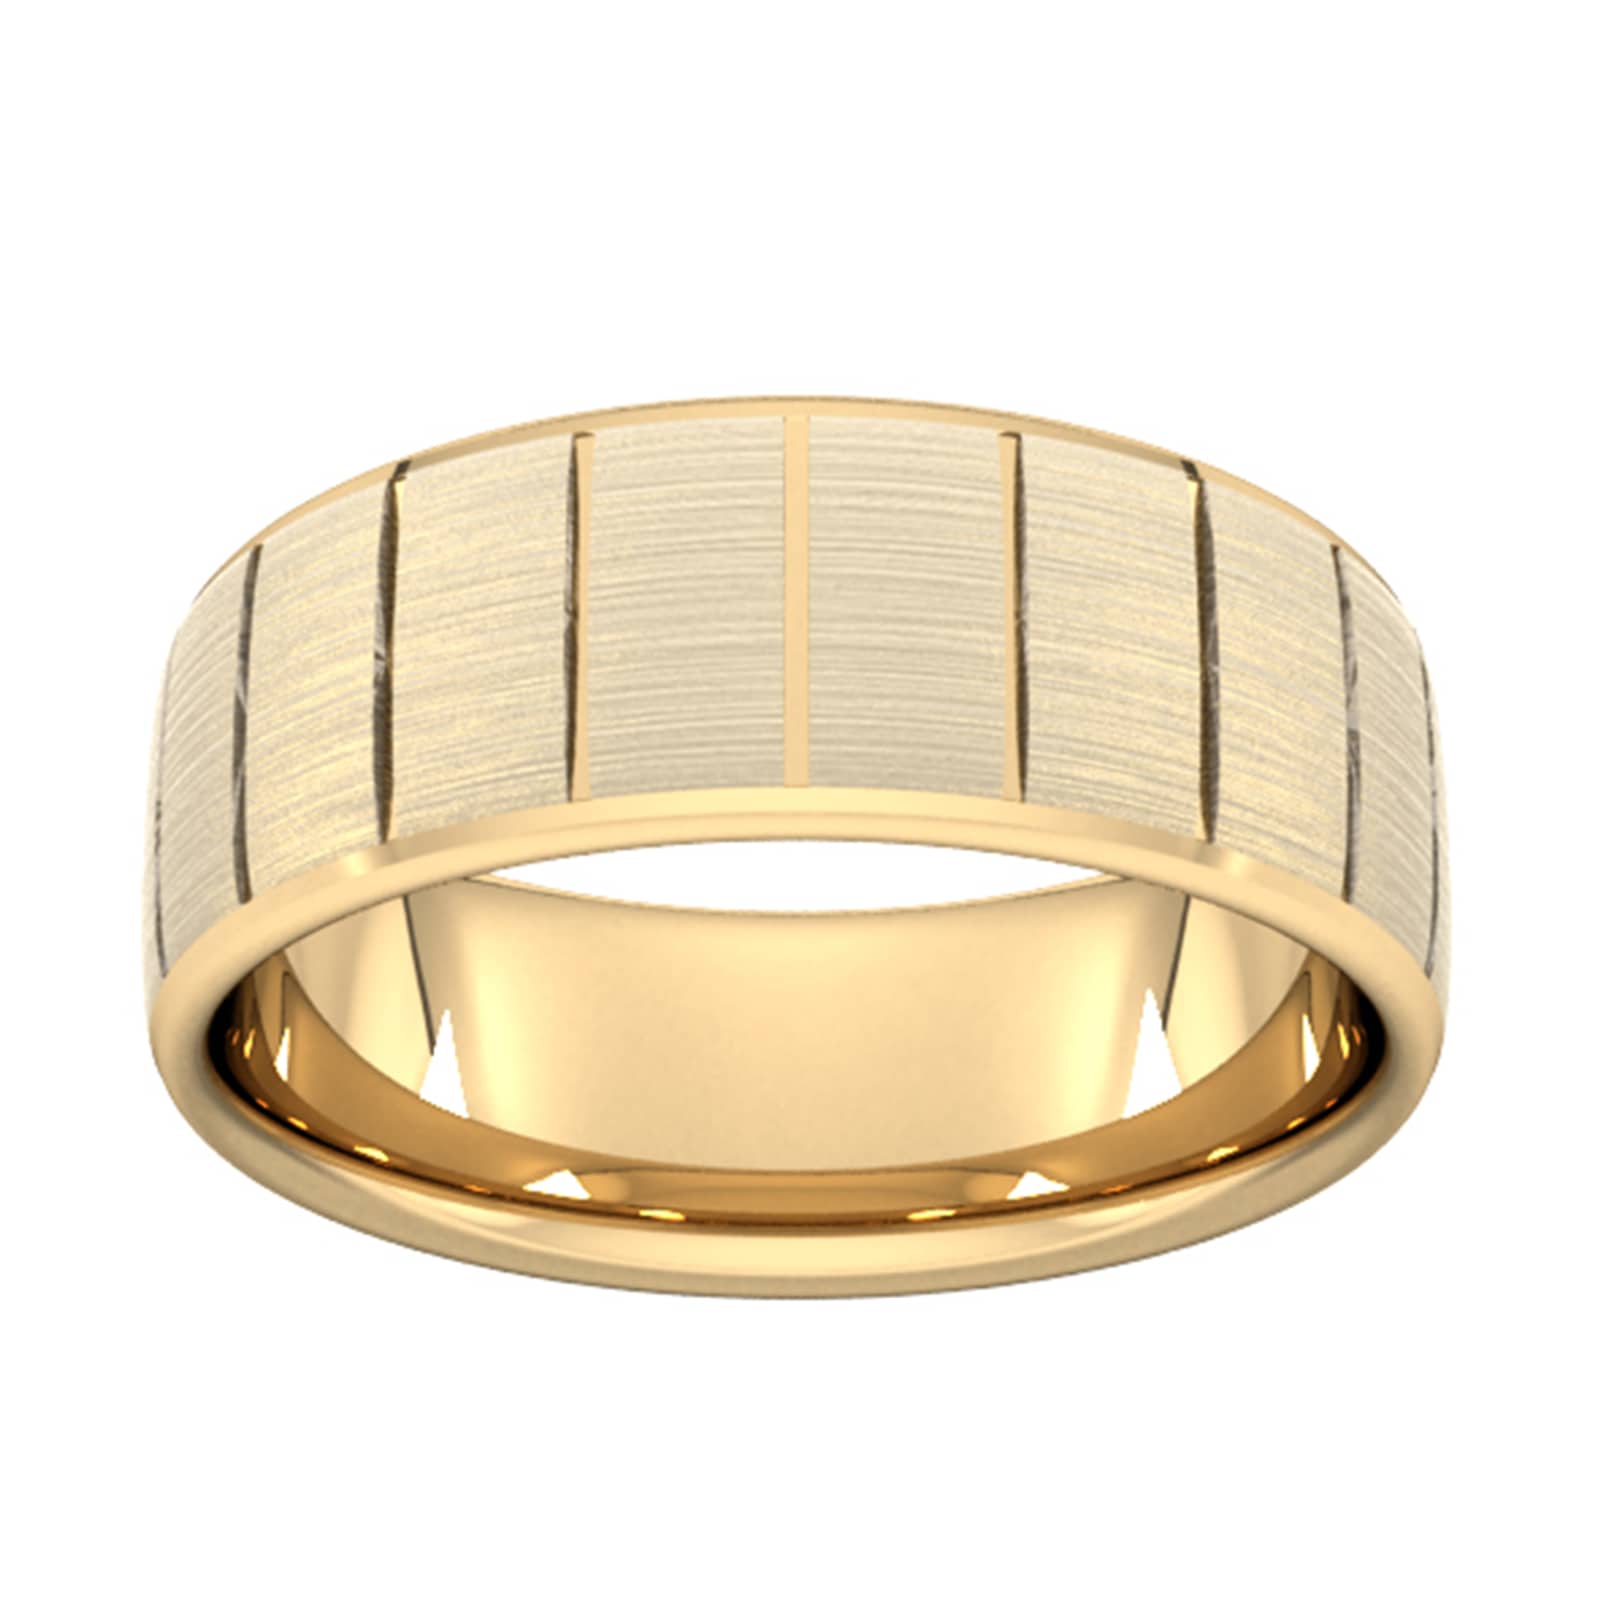 8mm Slight Court Extra Heavy Vertical Lines Wedding Ring In 9 Carat Yellow Gold - Ring Size U